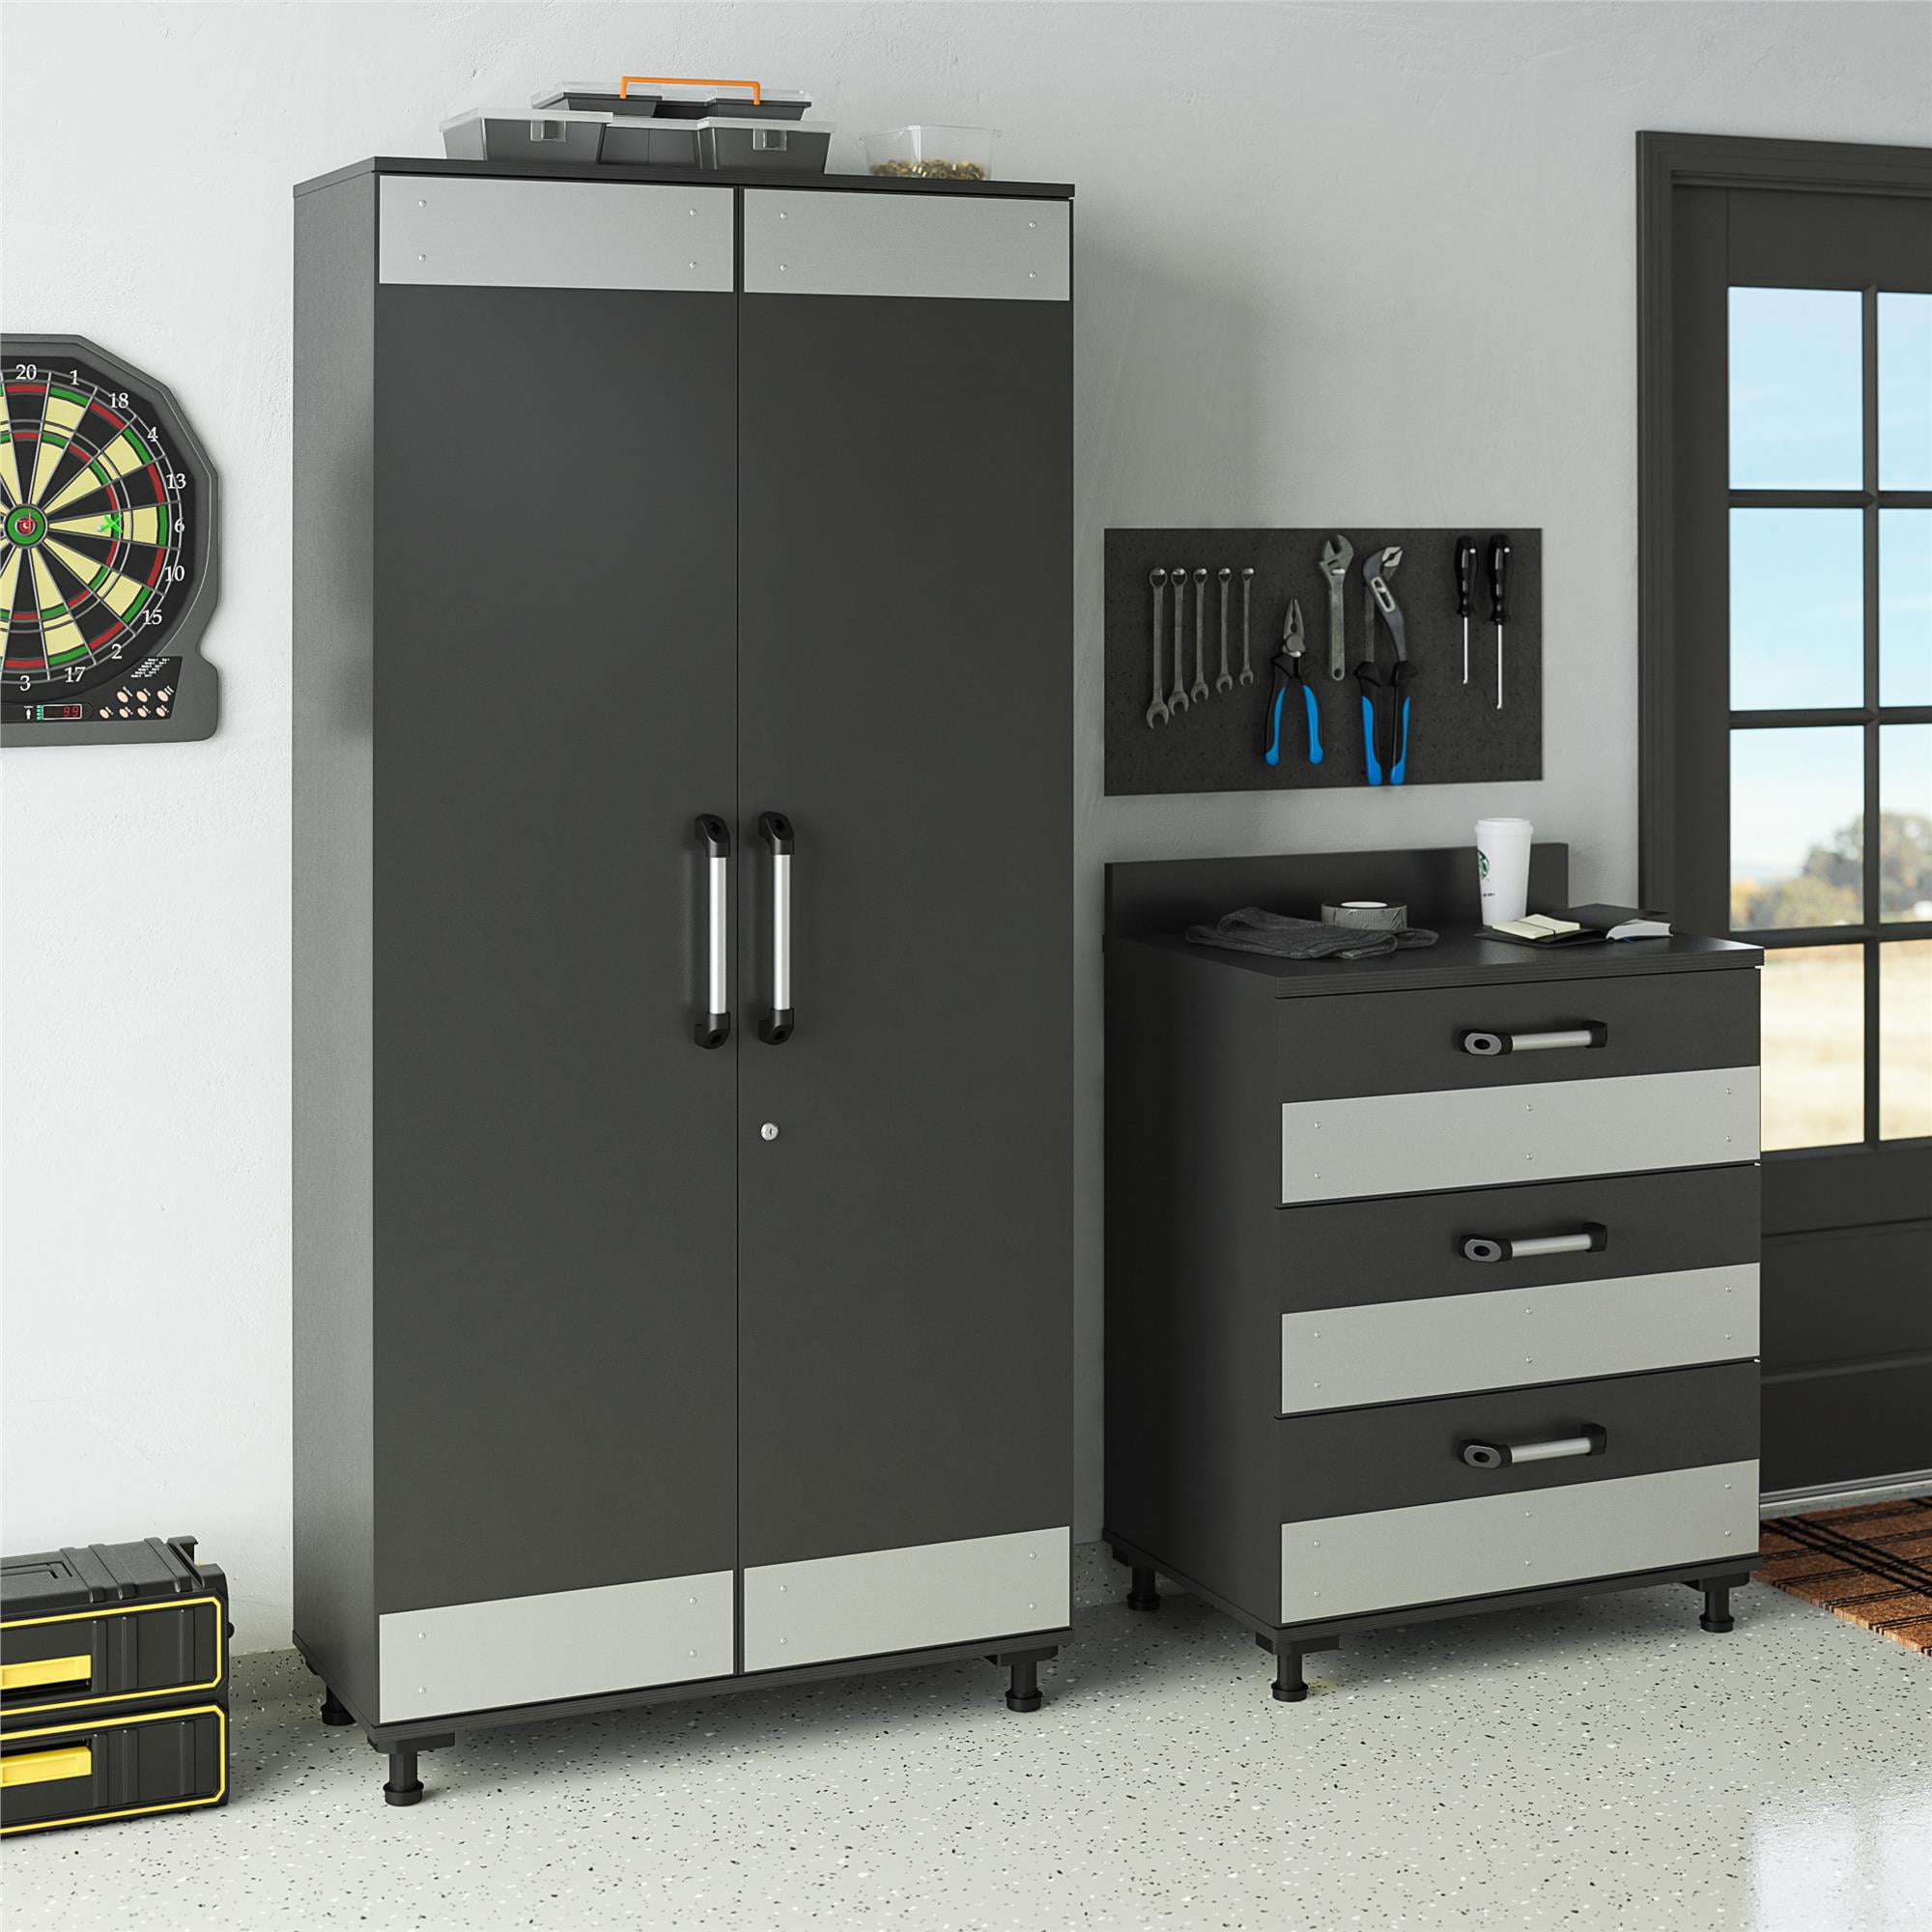 Tall Storage Cabinet Charcoal Gray - Buylateral